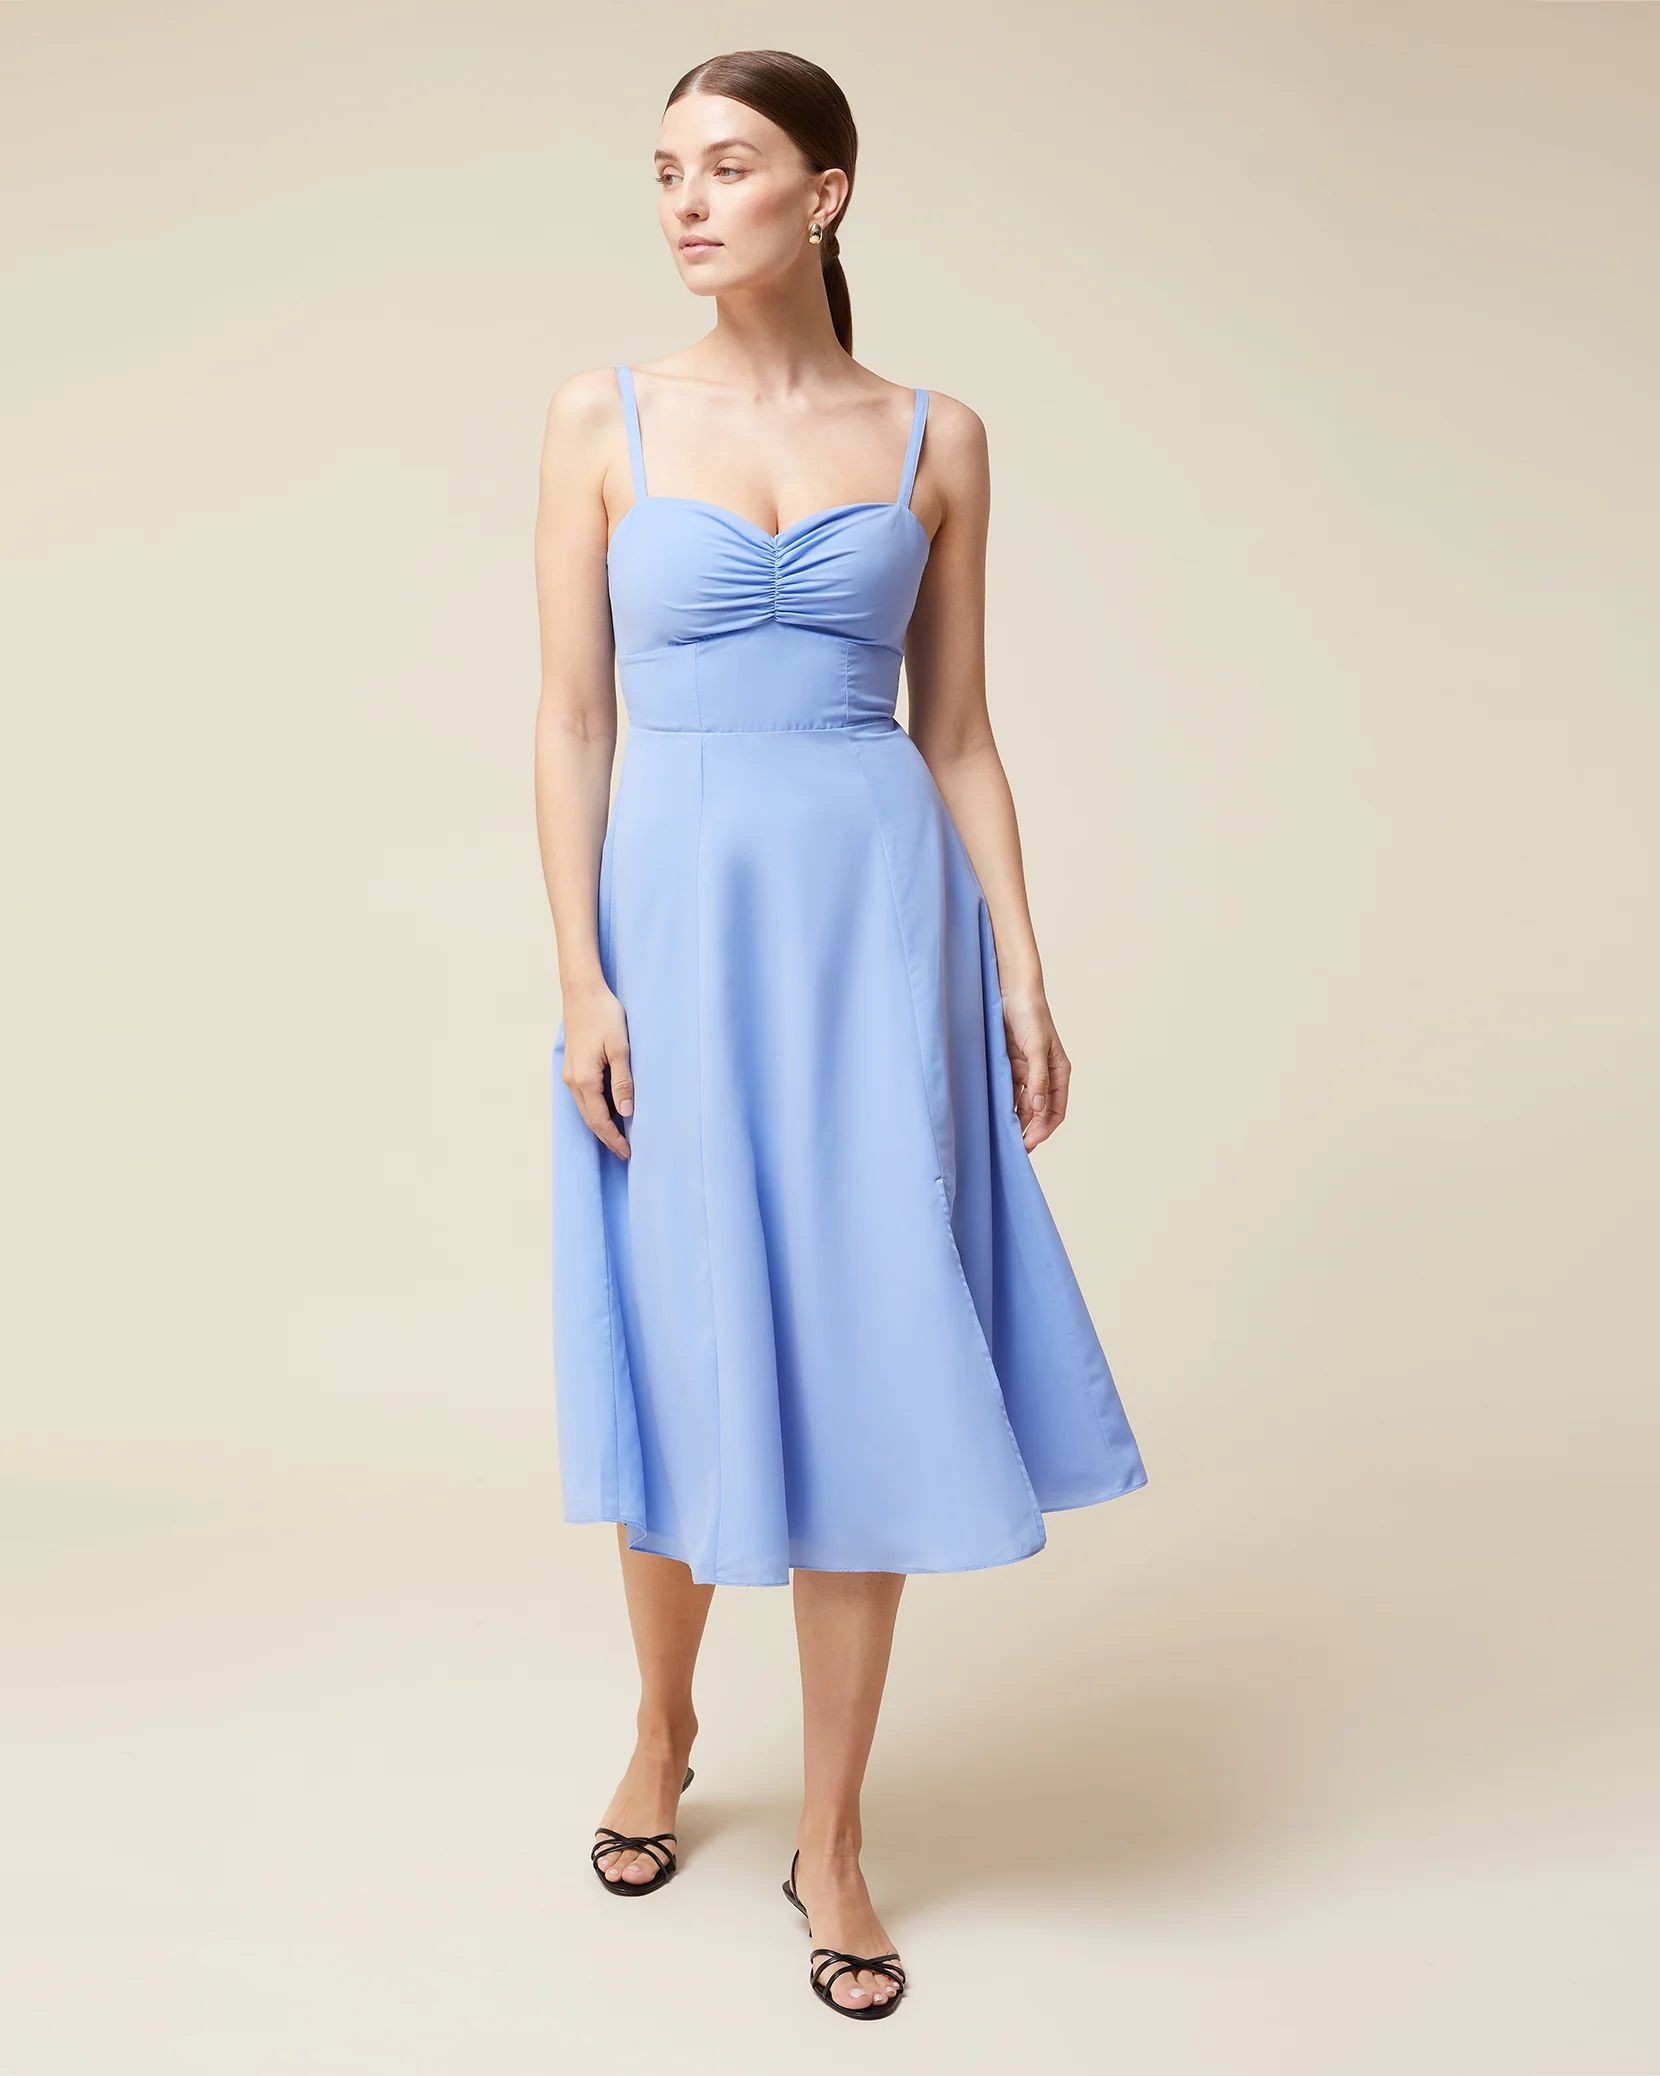 Ruched Cup Midi Dress | Rachel Parcell